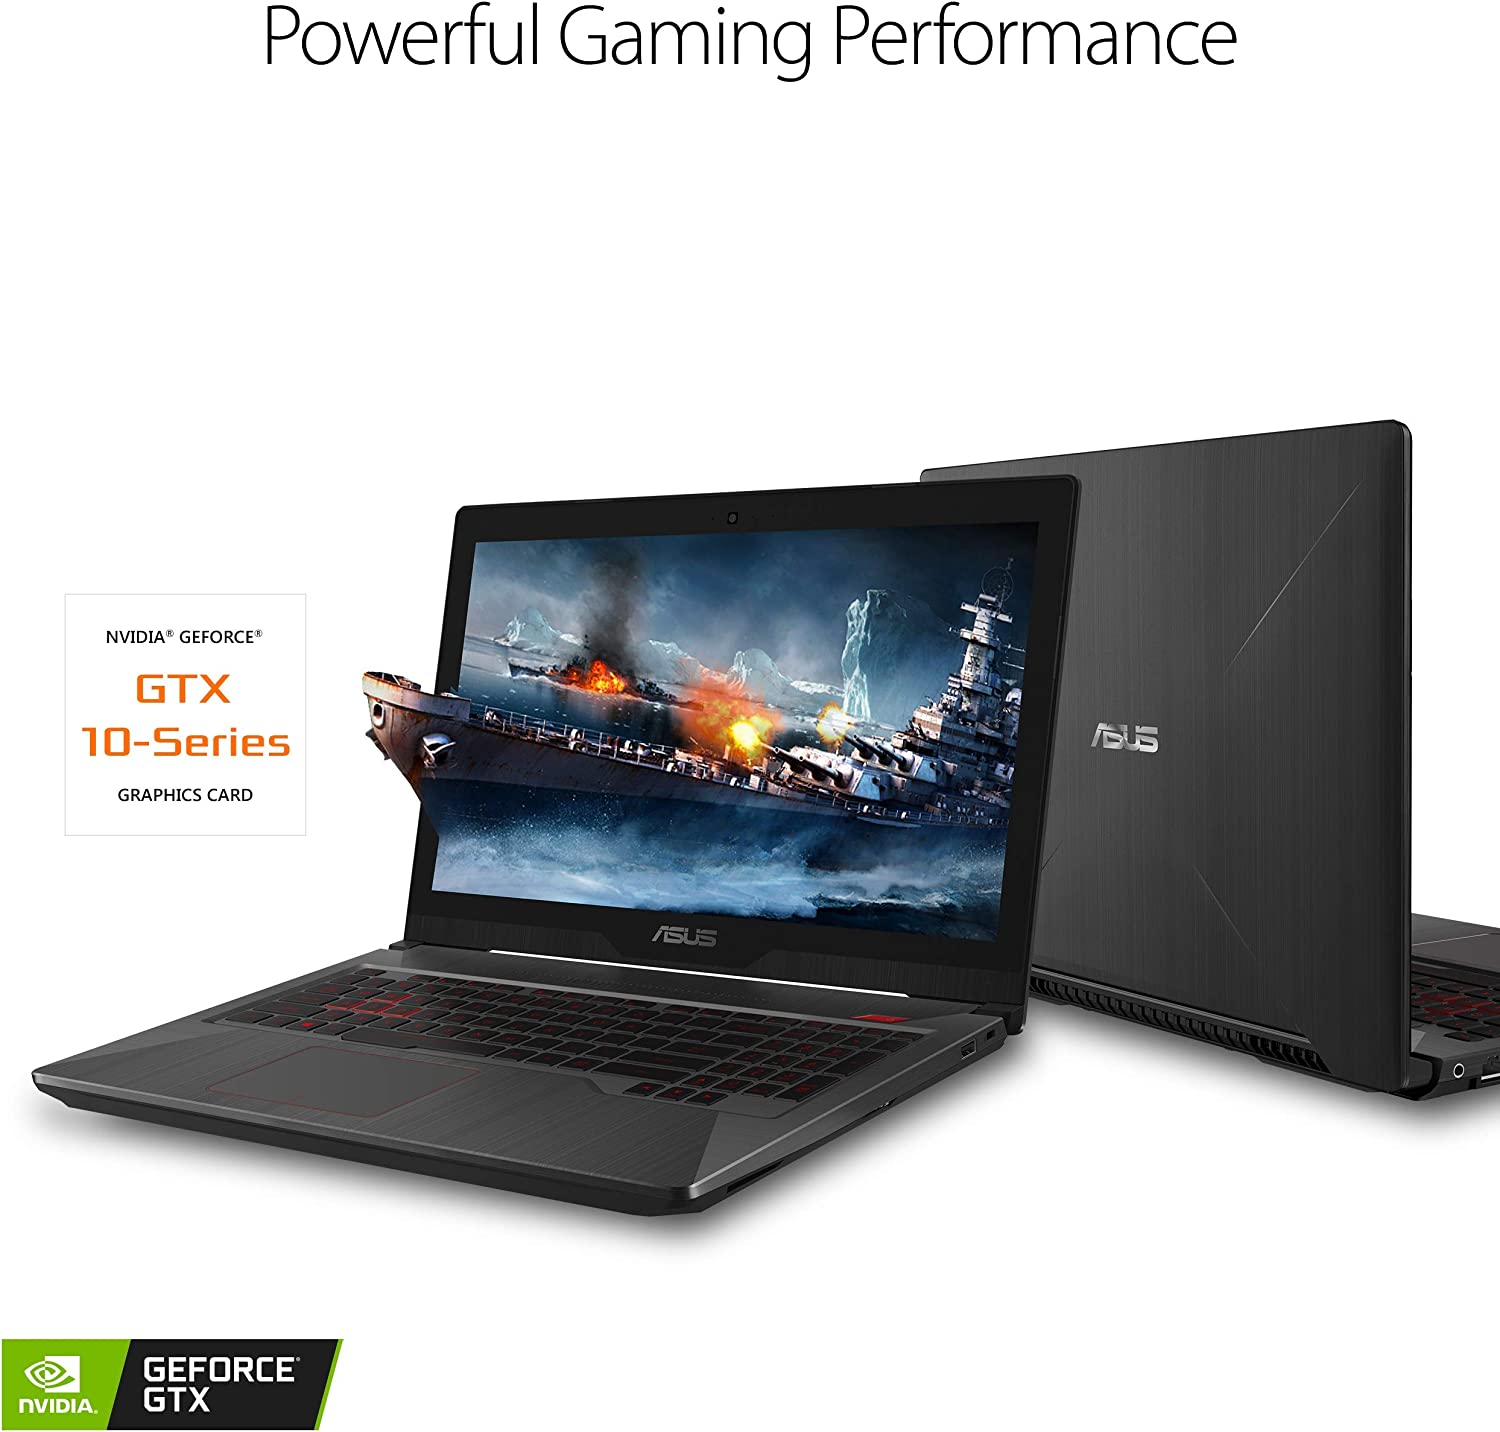 This image shows the ASUS ROG FX503 Gaming Laptop.